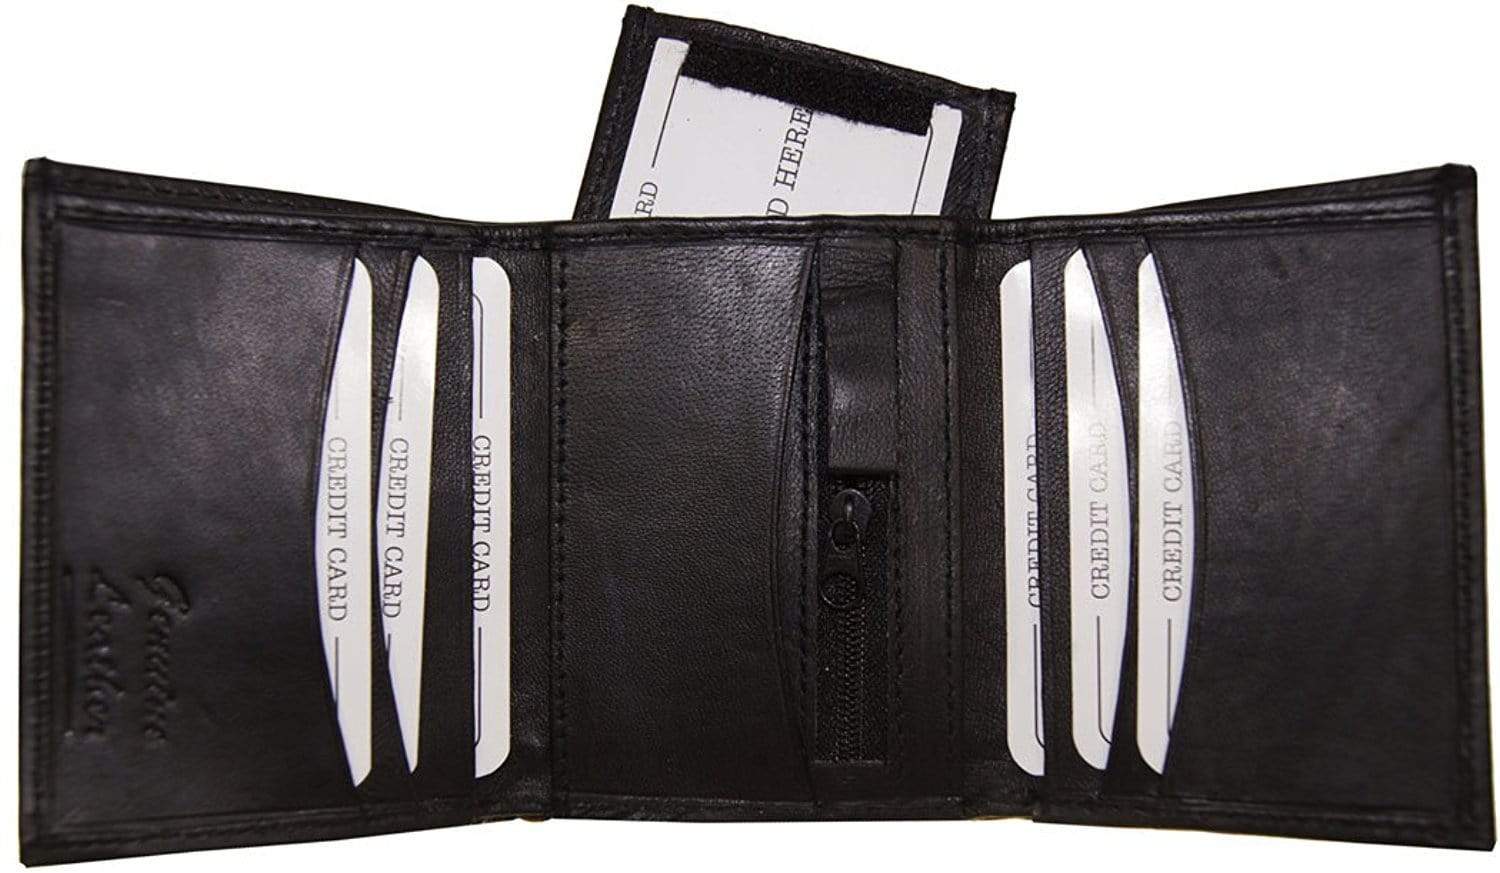 Genuine Leather Men Wallets Fashion Trifold Wallet Zip Coin Pocket